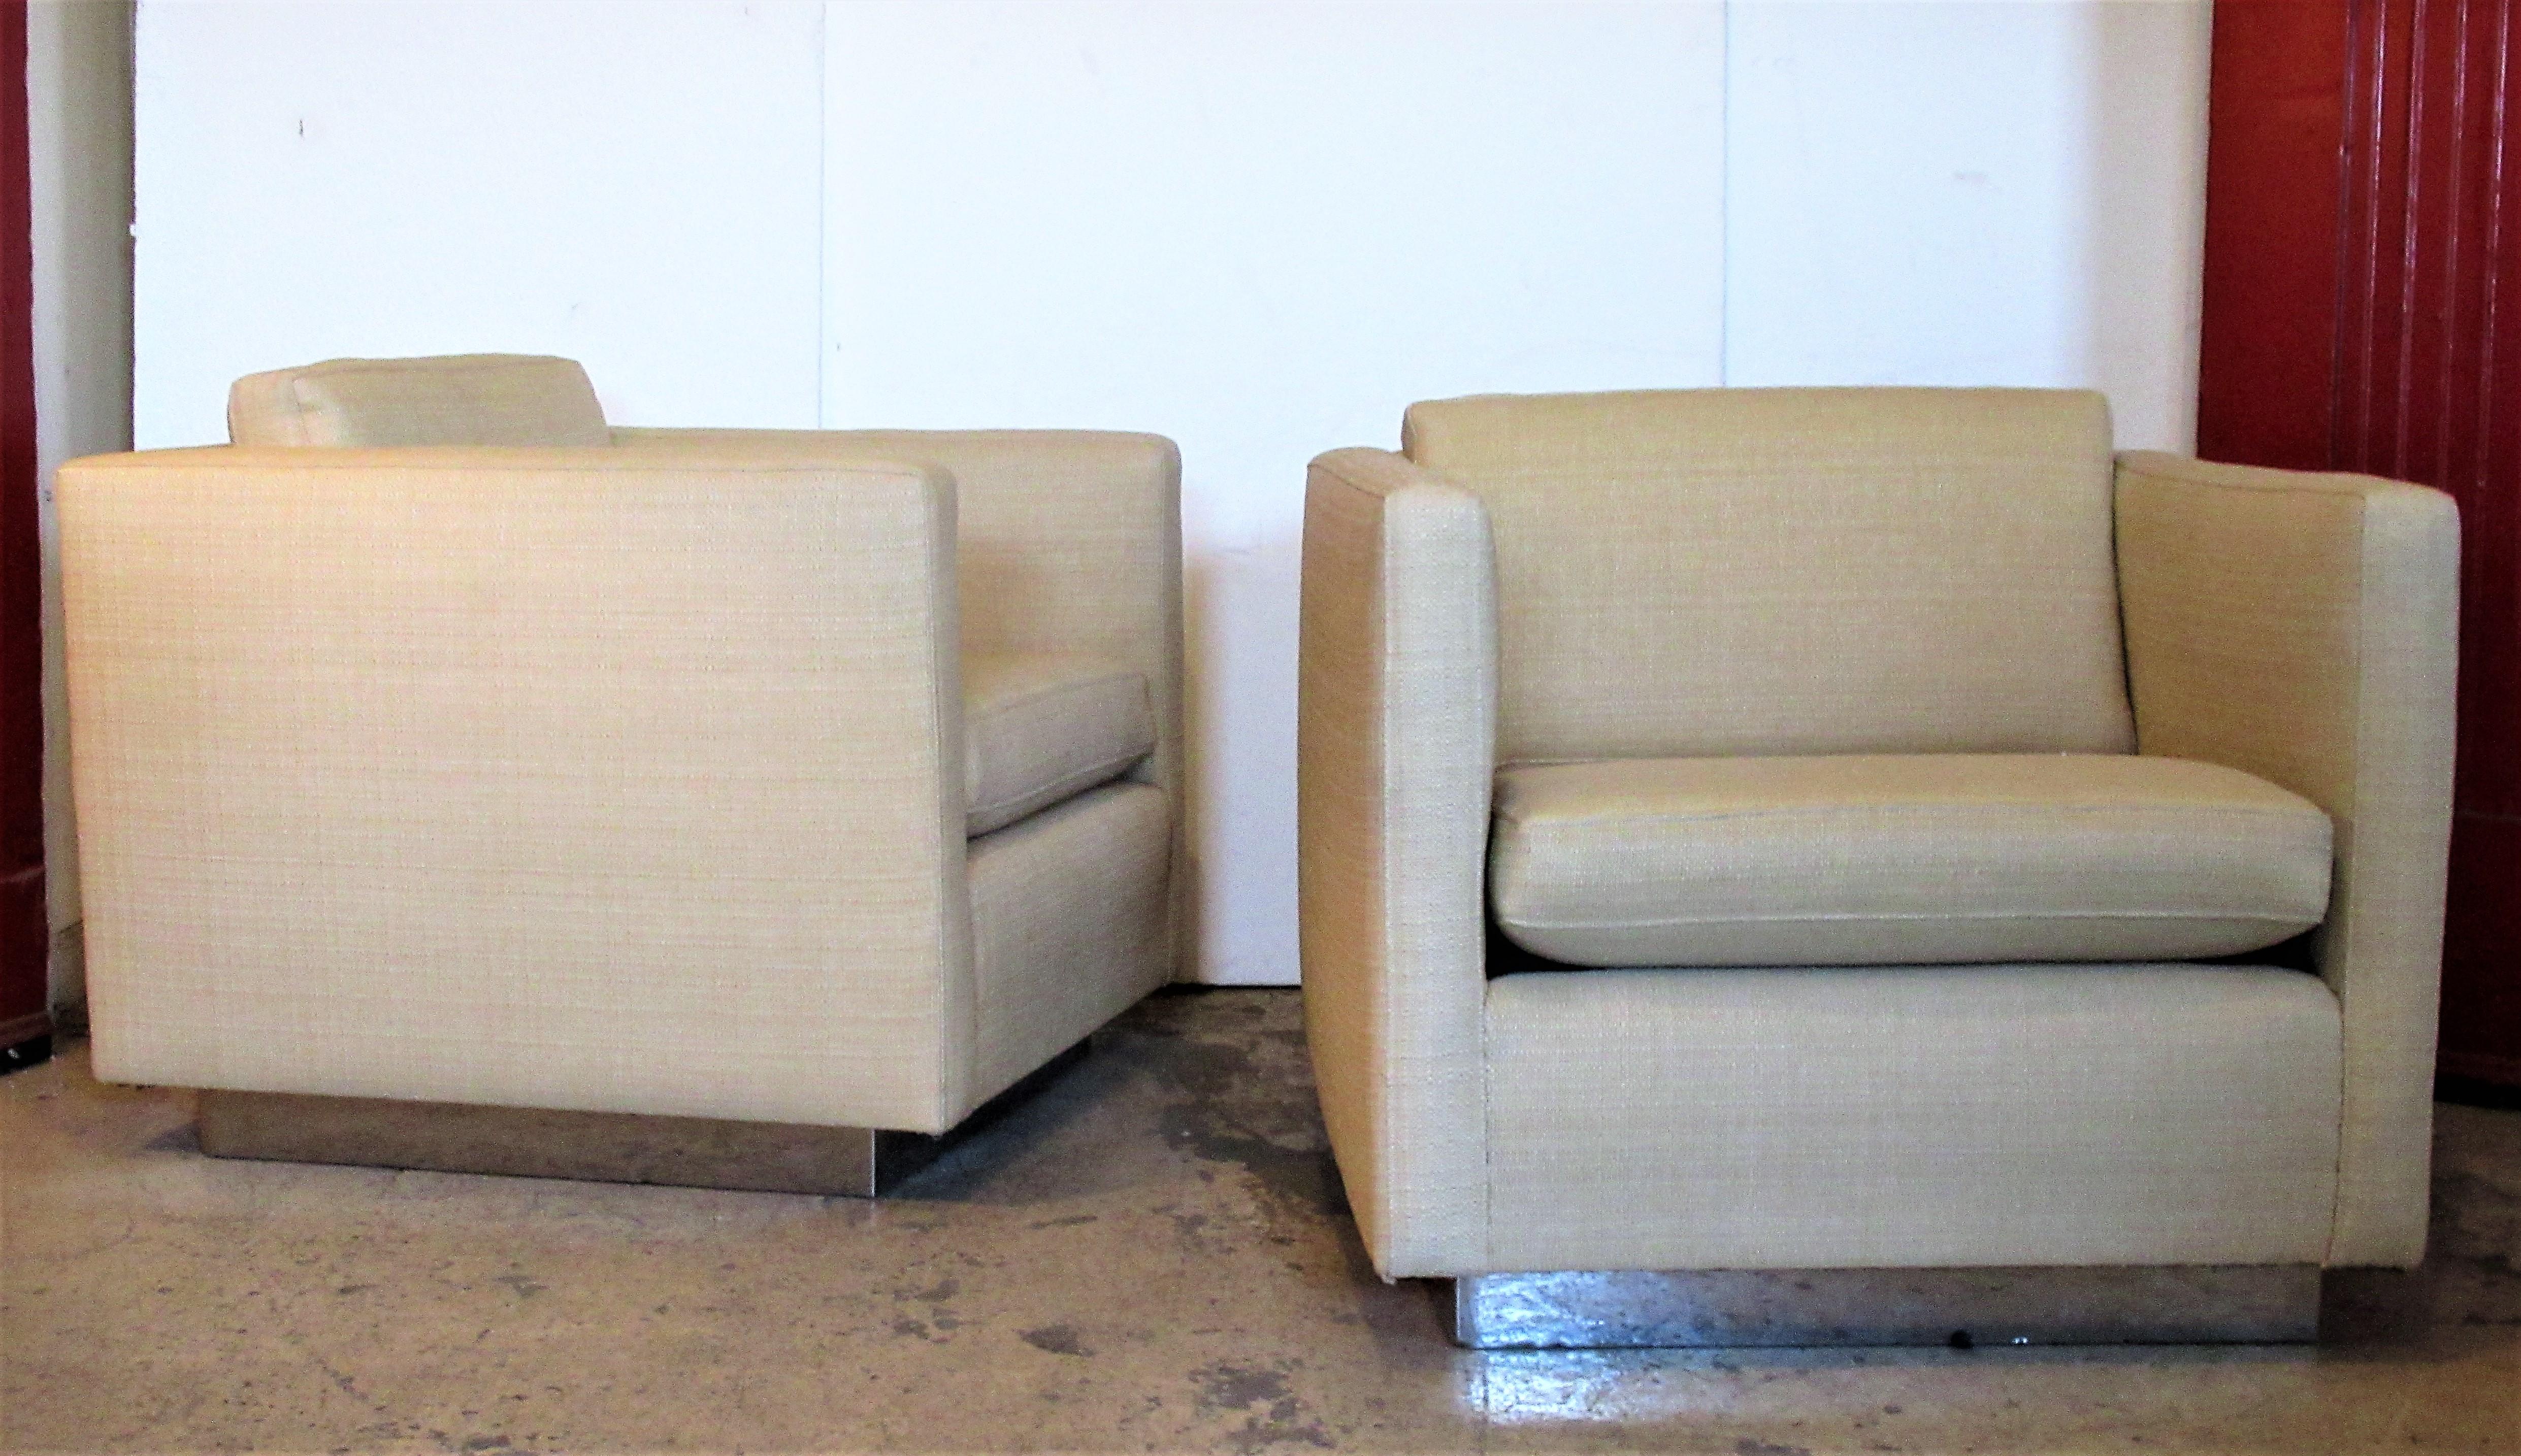 Pair of big chrome clad platform base cube lounge chairs having a floating form and a very tailored sophisticated look. The chairs were upholstered within the past ten years in a beautiful commercial grade natural straw colored textured grass cloth